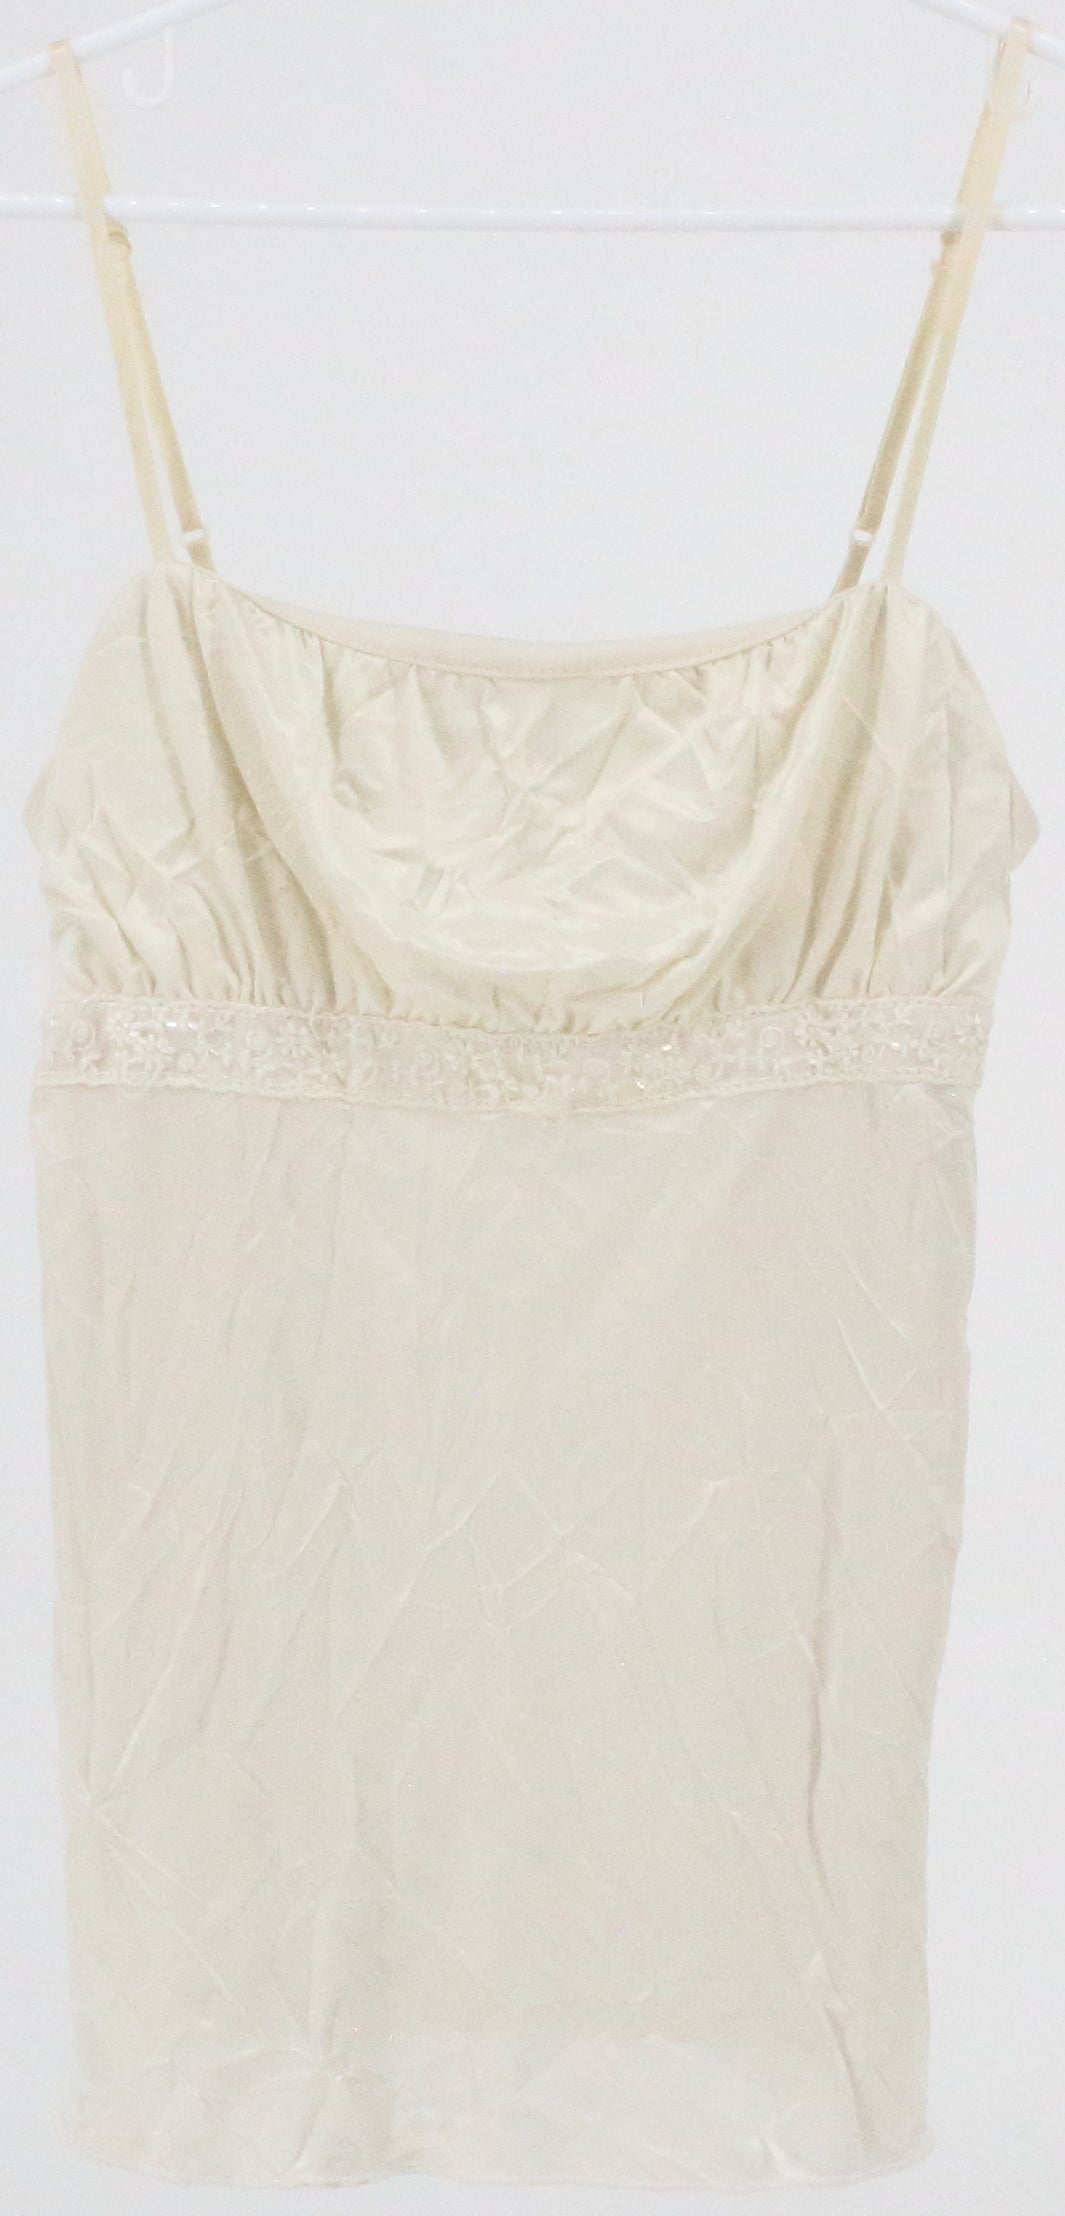 Maurices Off White Camisole